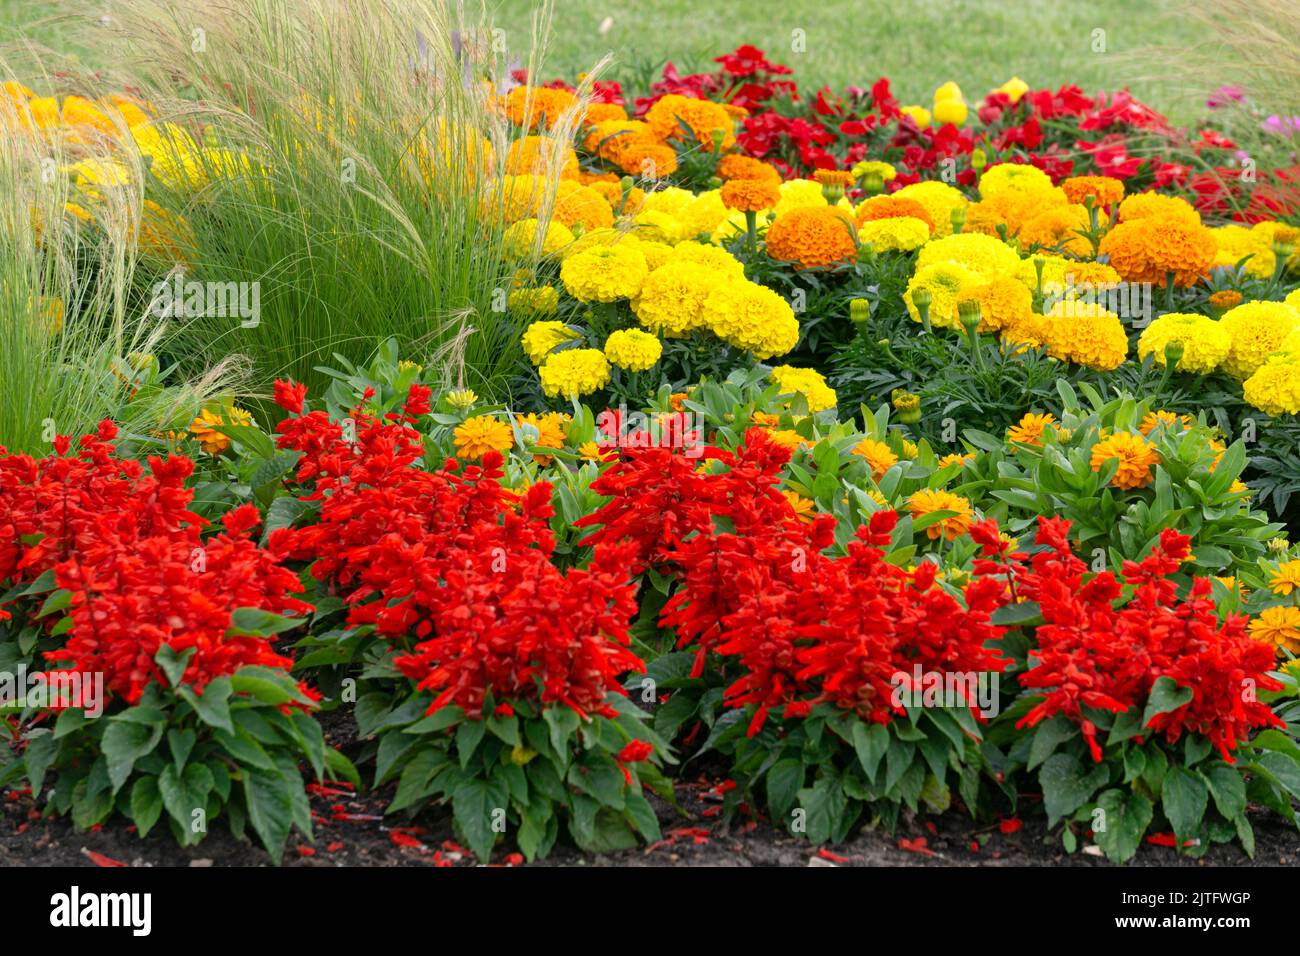 Lots of red salvia flowers and marigolds in the city park. Stock Photo